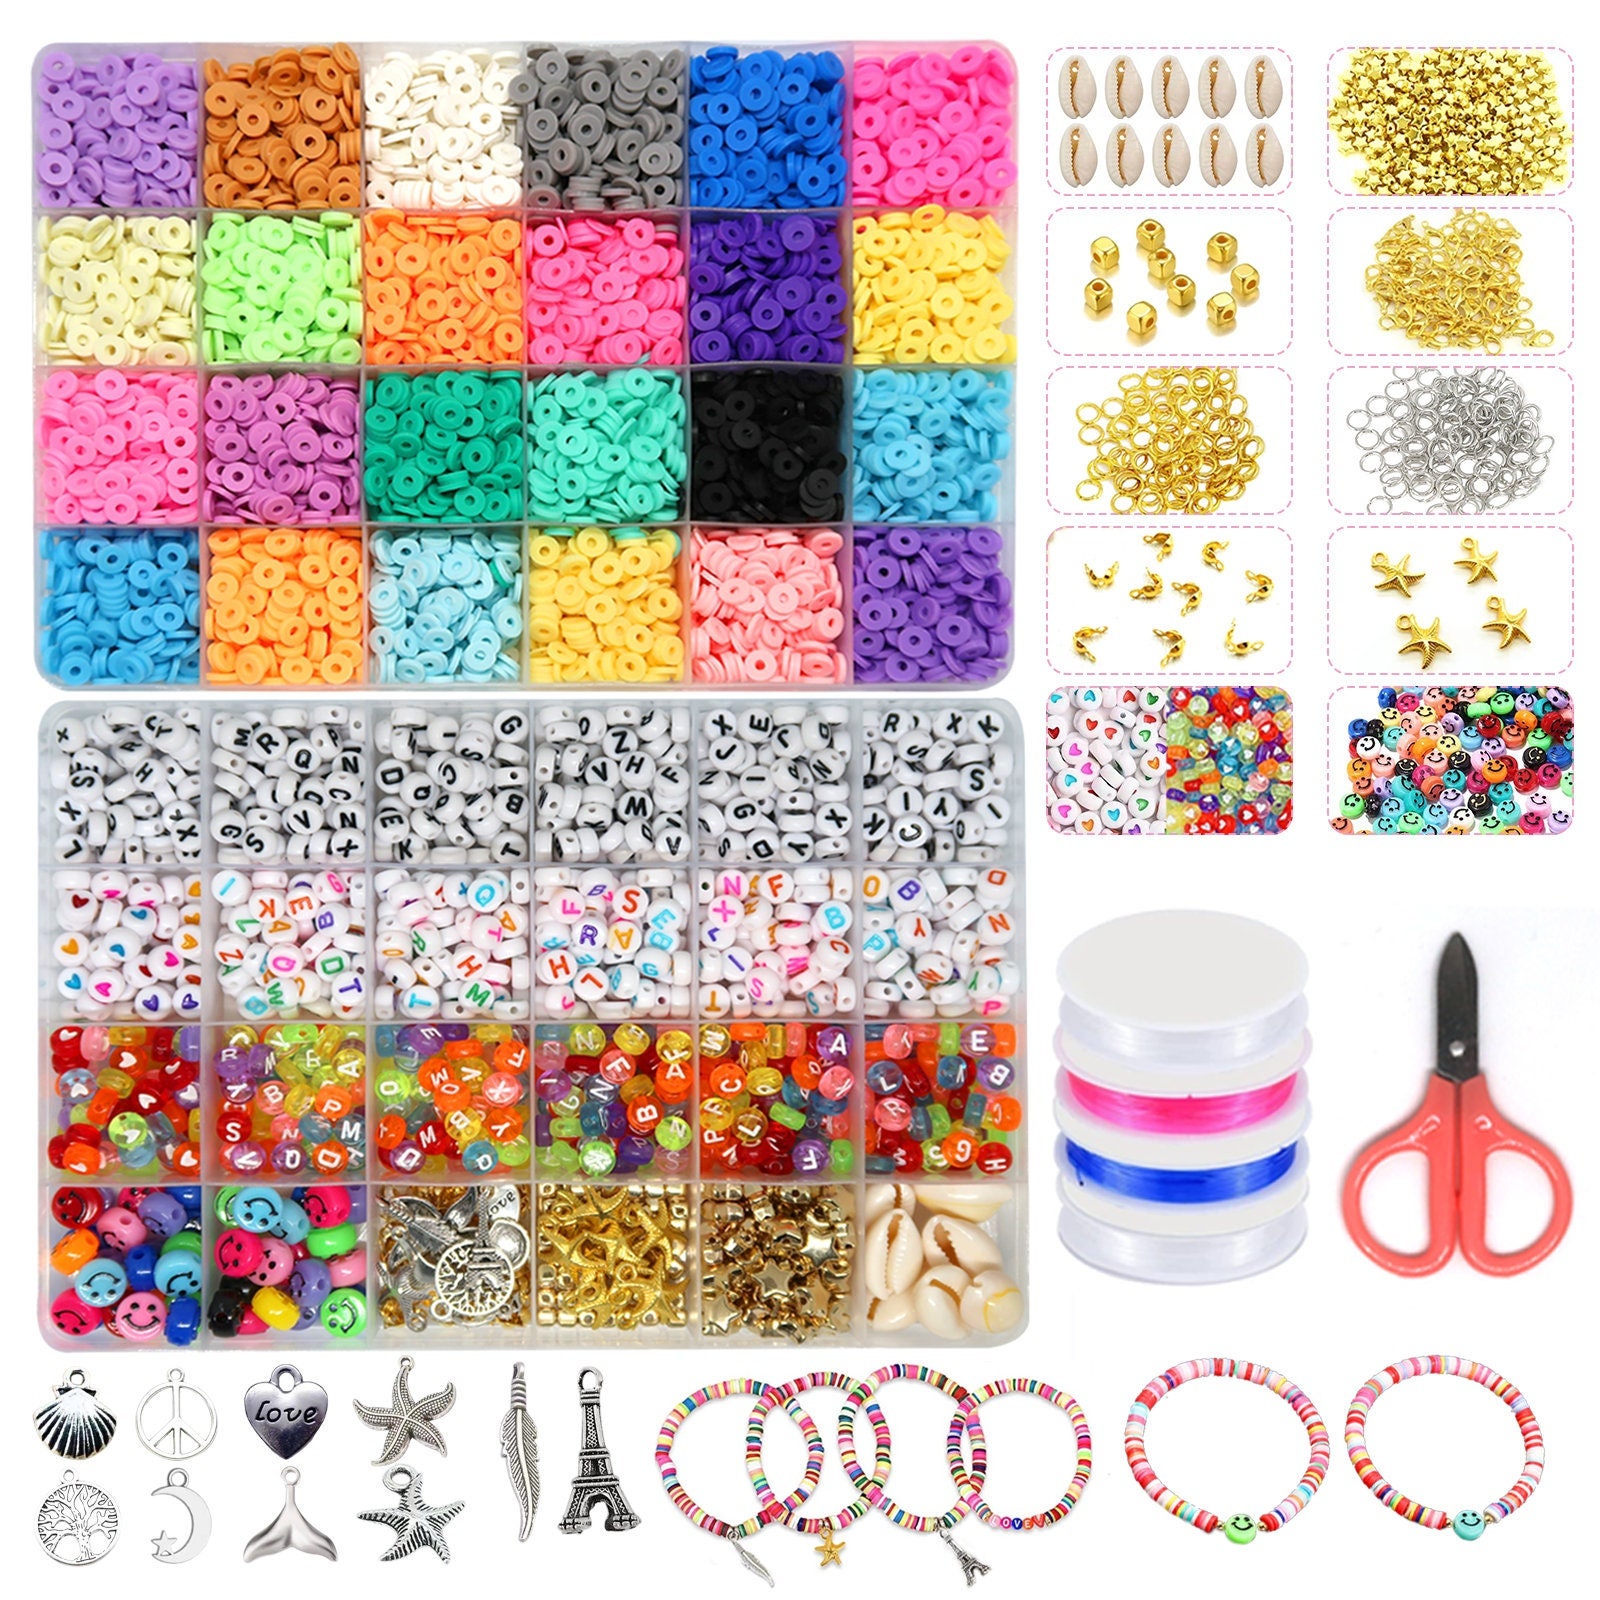 4600 PCS Clay Beads Bracelet Making Kits 24 Colors Beads Supplies